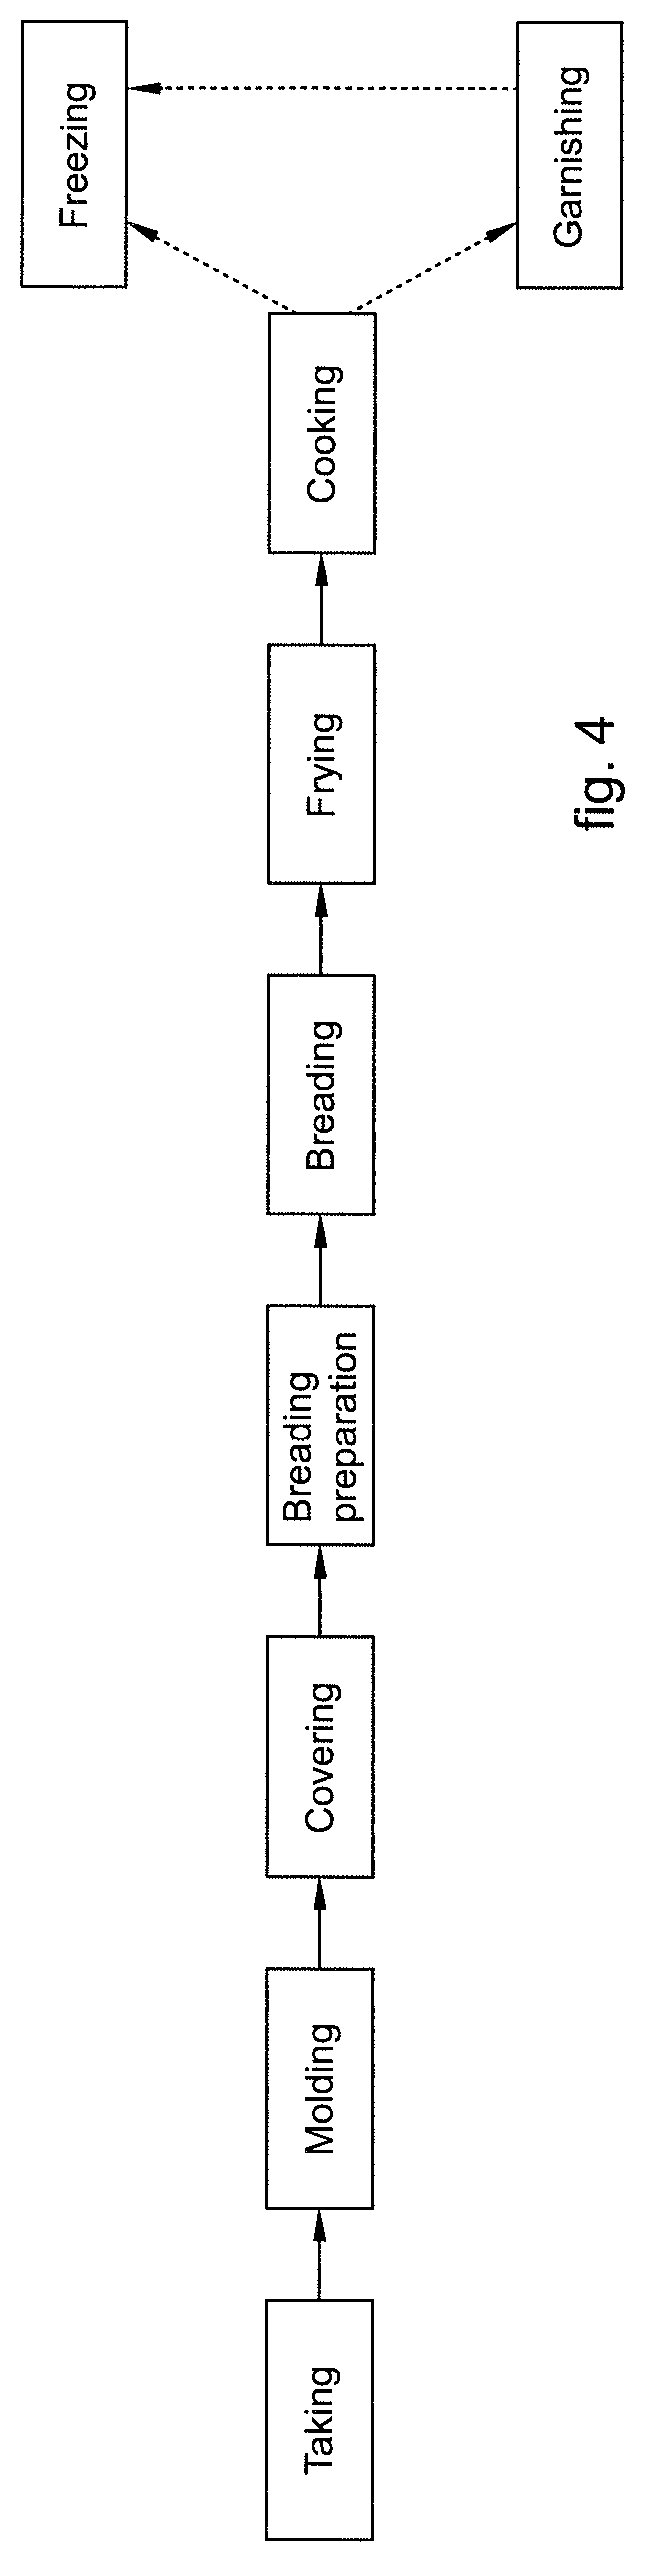 System for making a food product having a meat-based layer